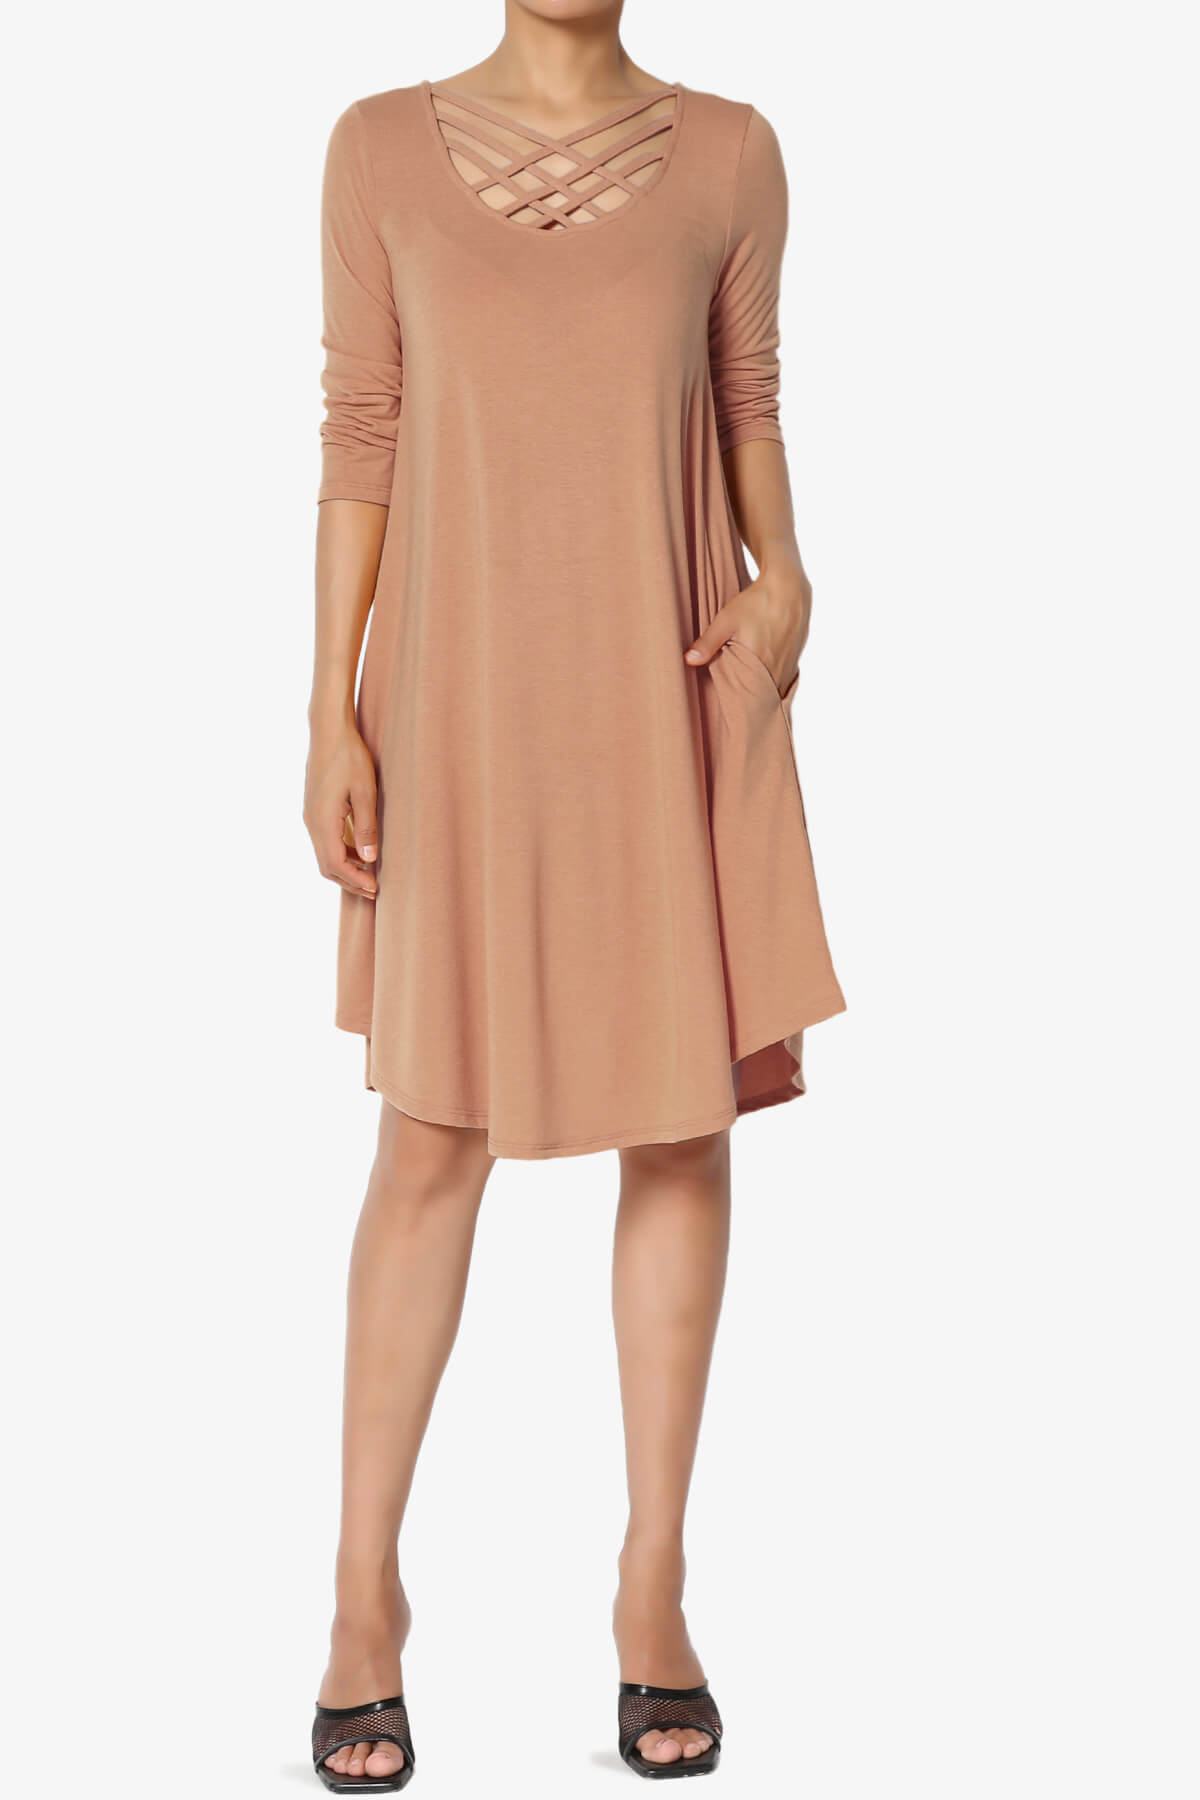 Ariella 3/4 Sleeve Strappy Scoop Neck Dress EGG SHELL_6